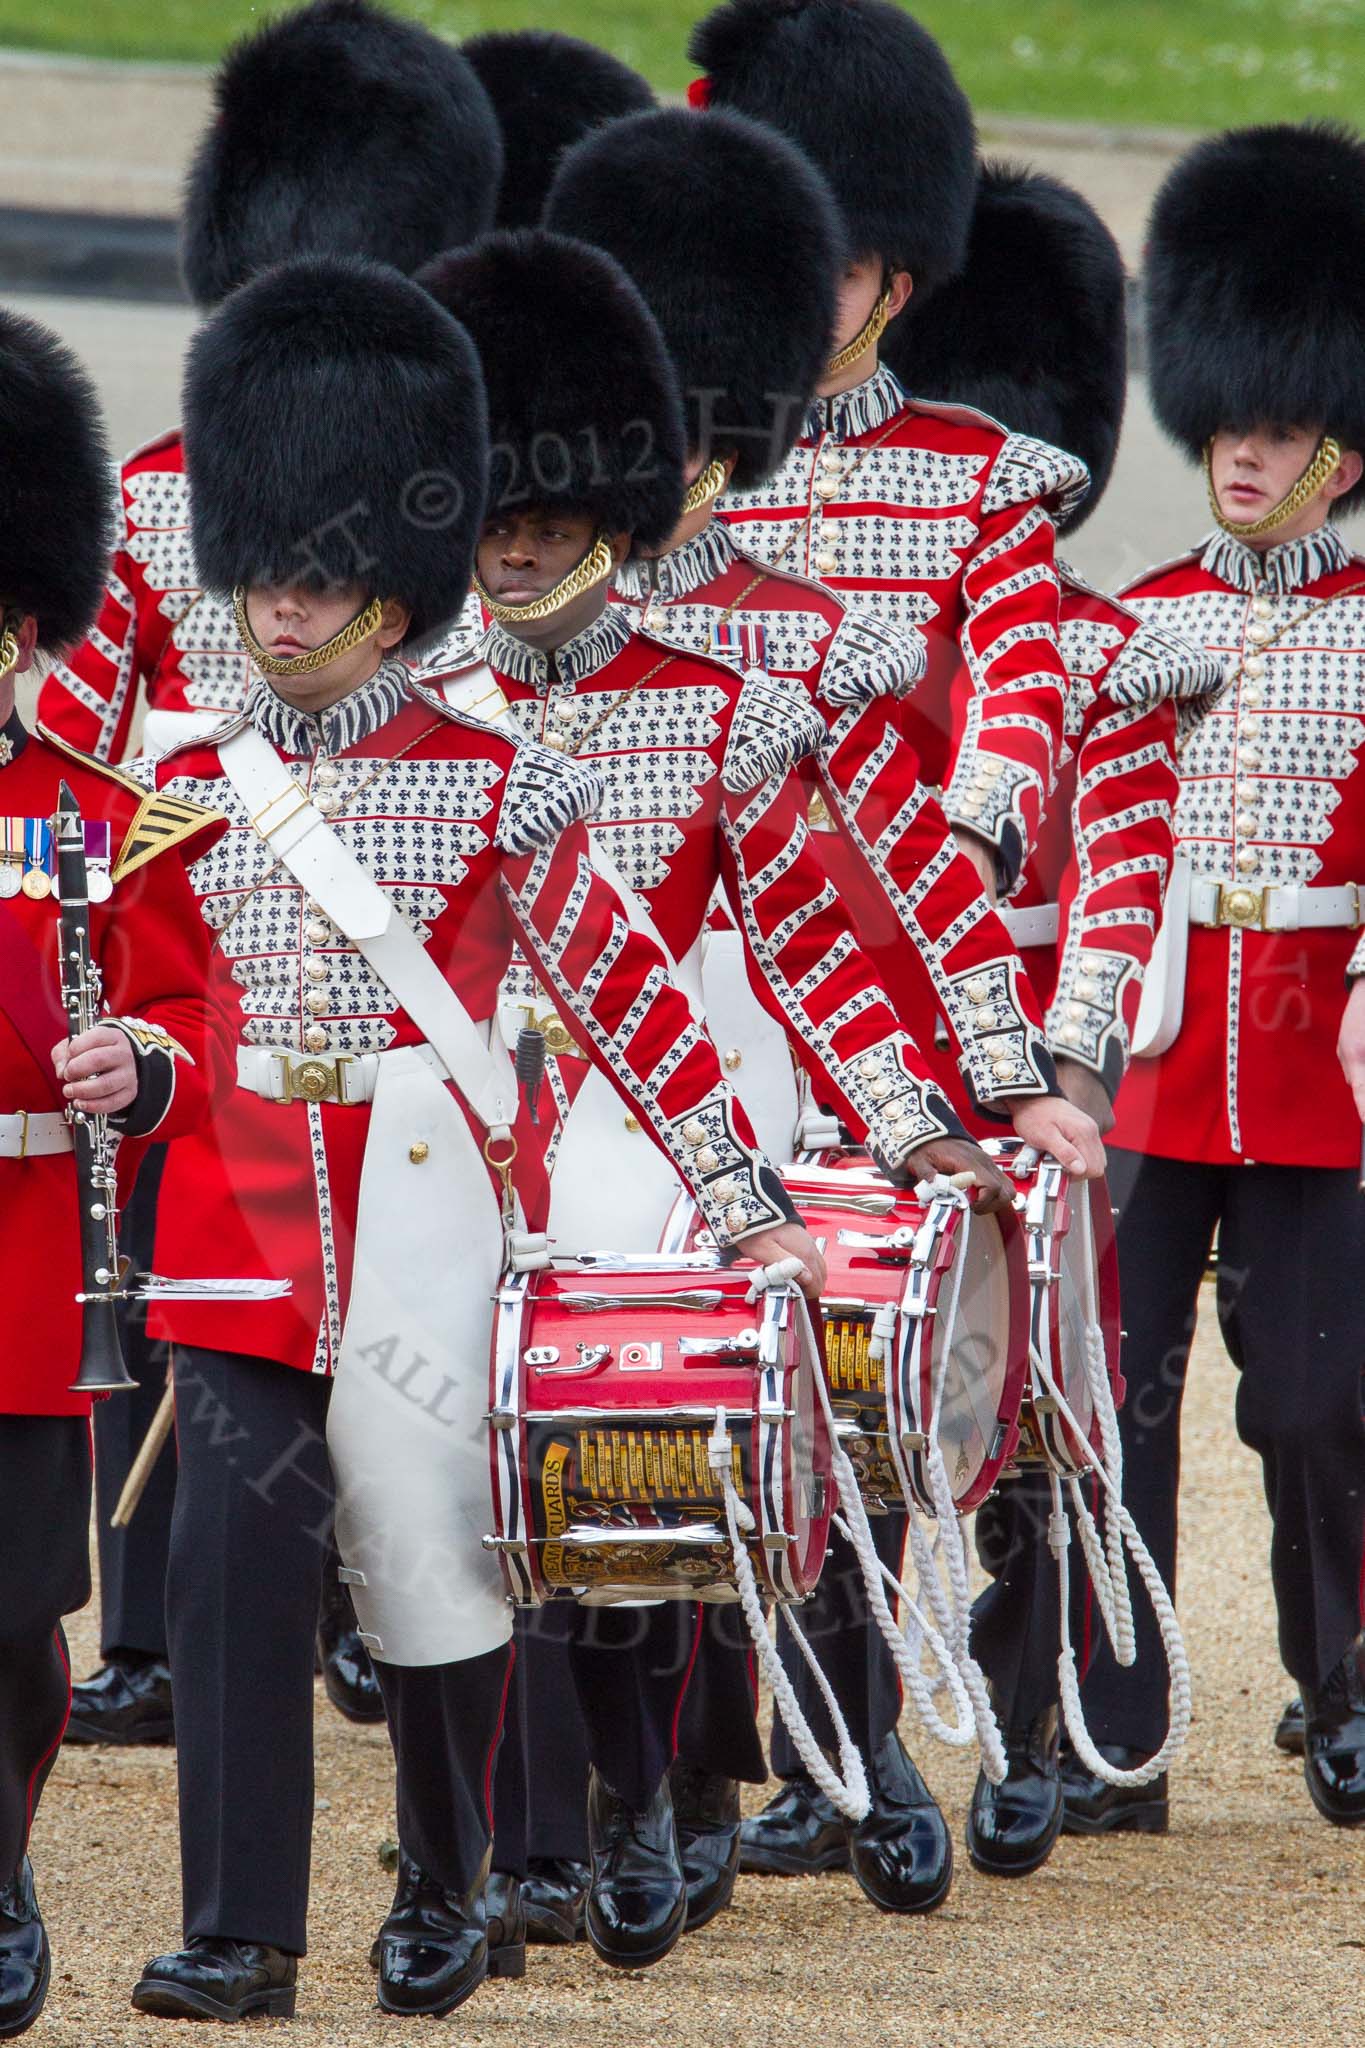 The Colonel's Review 2012: Drummers of the Band of the Coldstream Guards..
Horse Guards Parade, Westminster,
London SW1,

United Kingdom,
on 09 June 2012 at 10:31, image #81